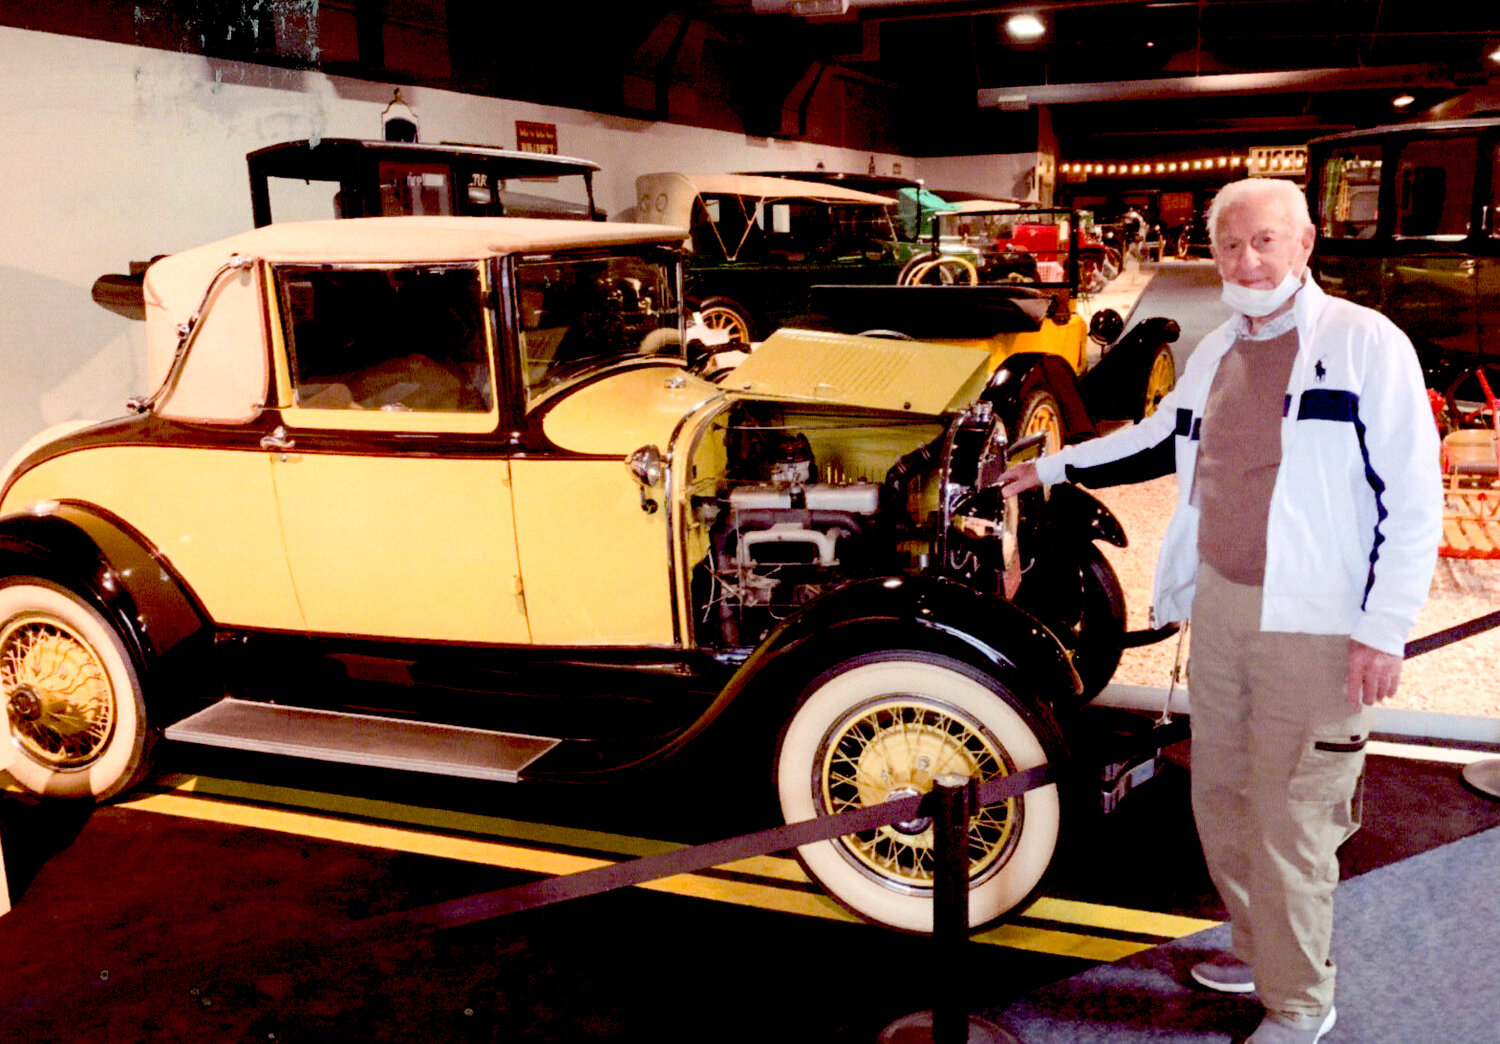 Gordon MacDougall, 97, posing in front of a 1930 Model A Ford, which was the model his father purchased for the family in Prince Edward Island in Canada.